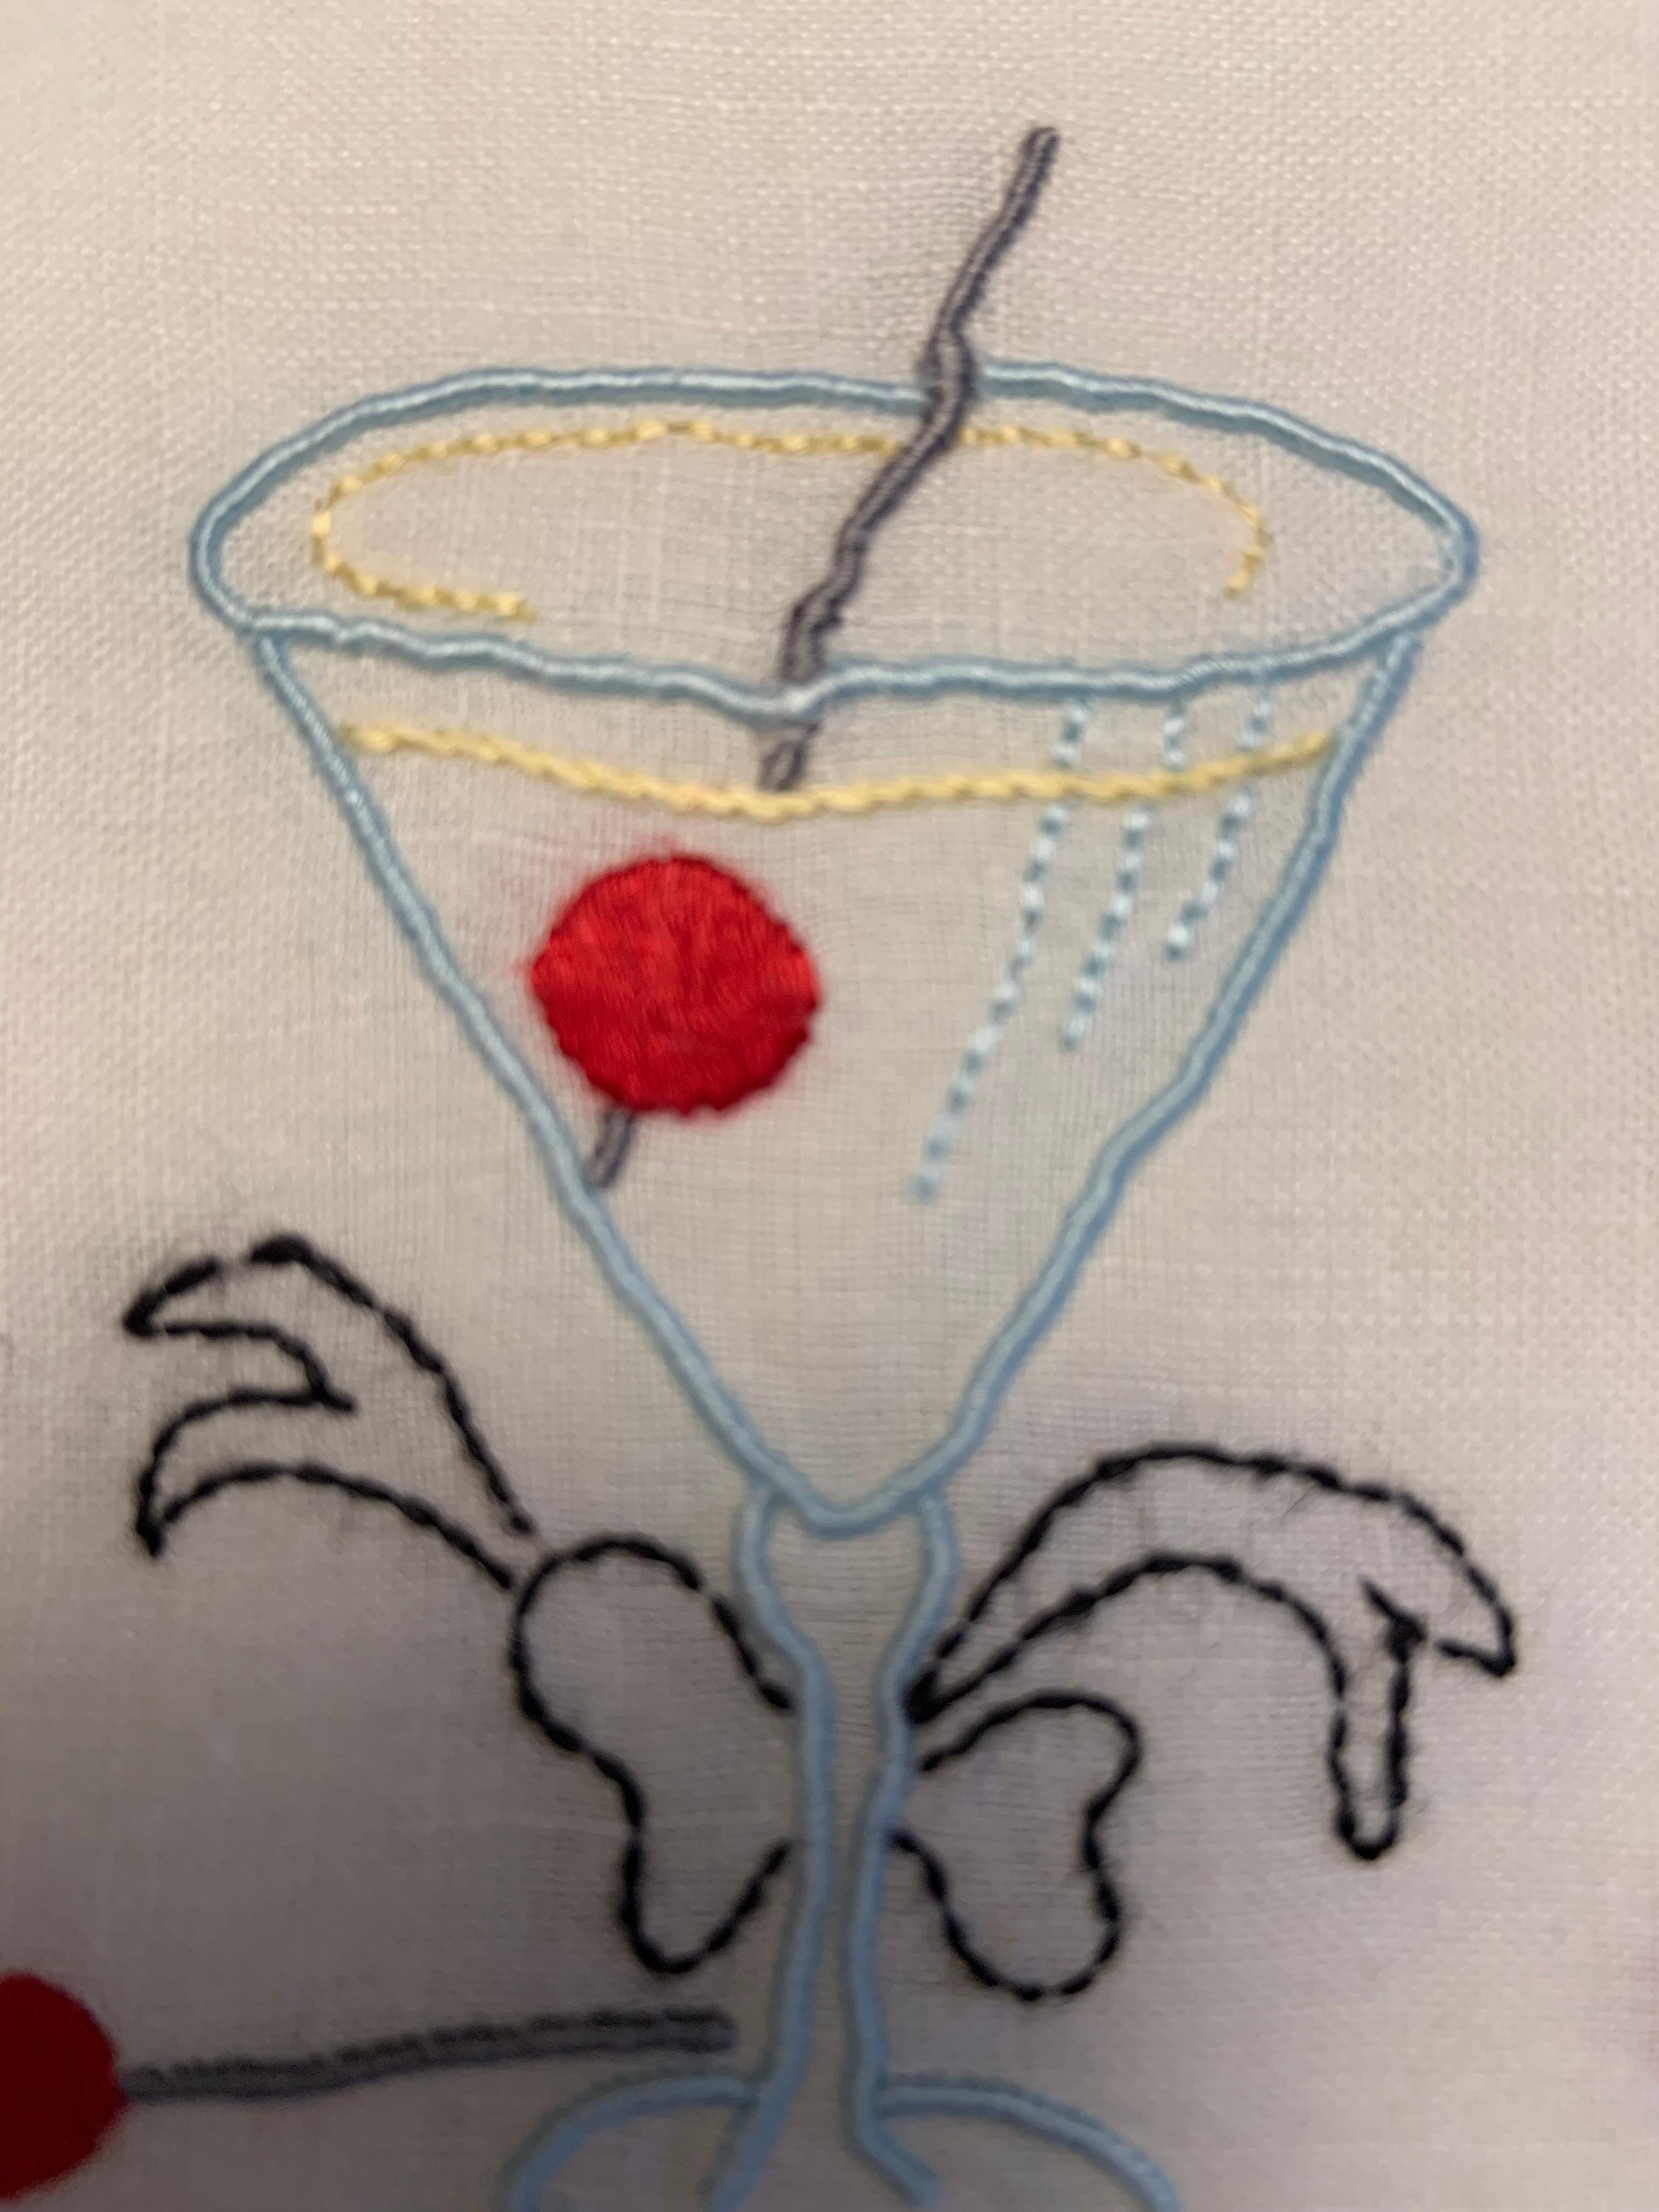 embroidered cocktail napkins